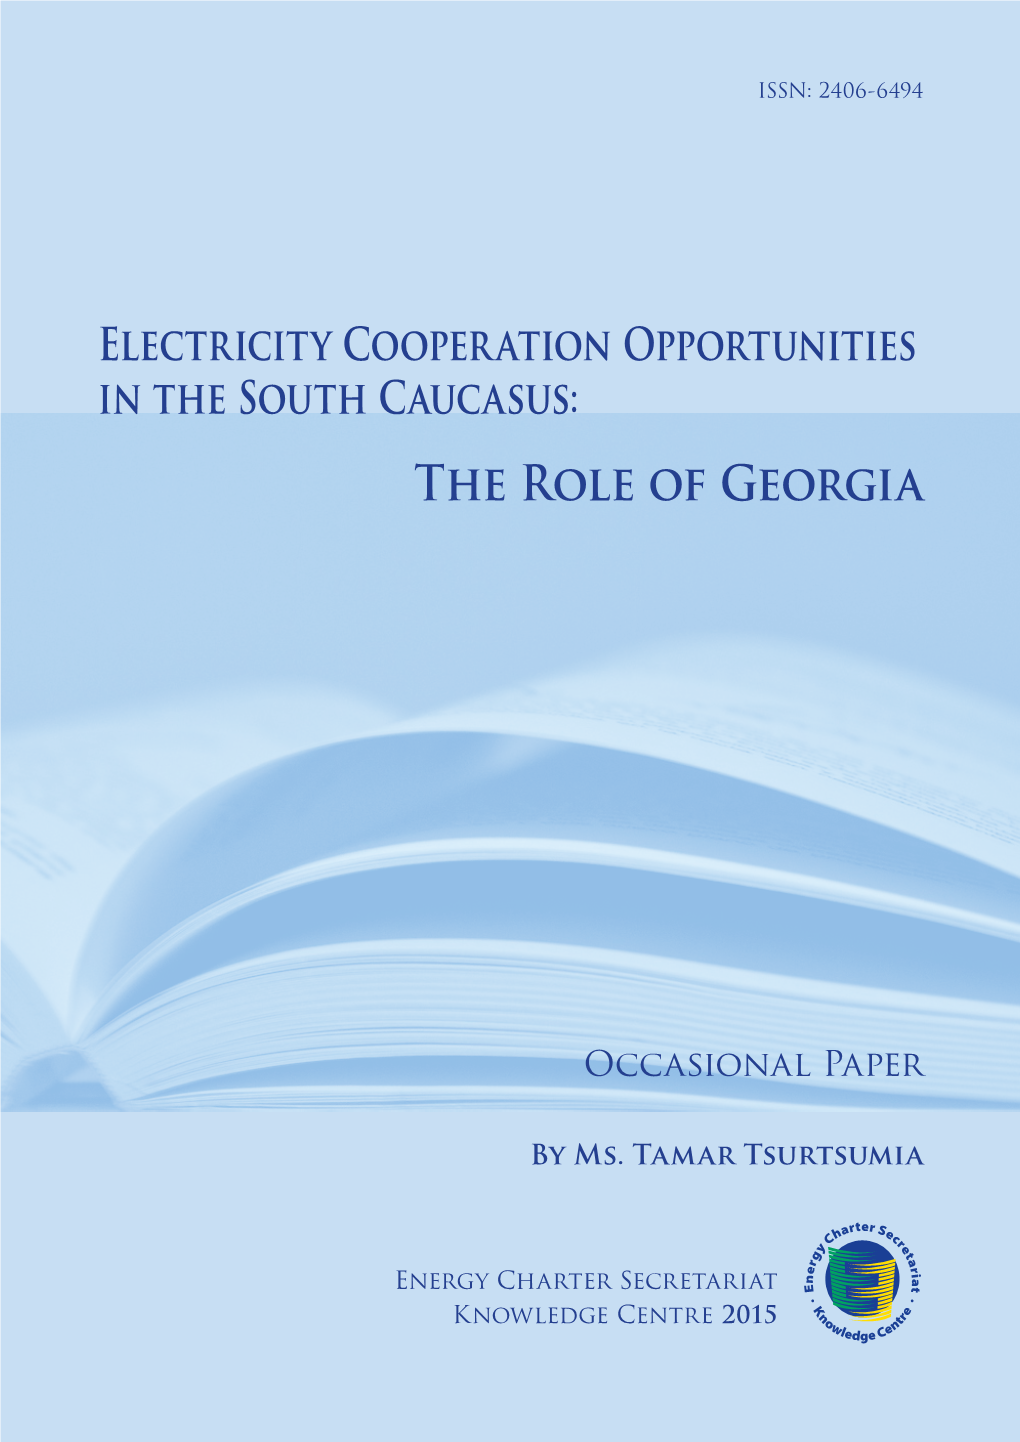 Electricity in South Caucasus